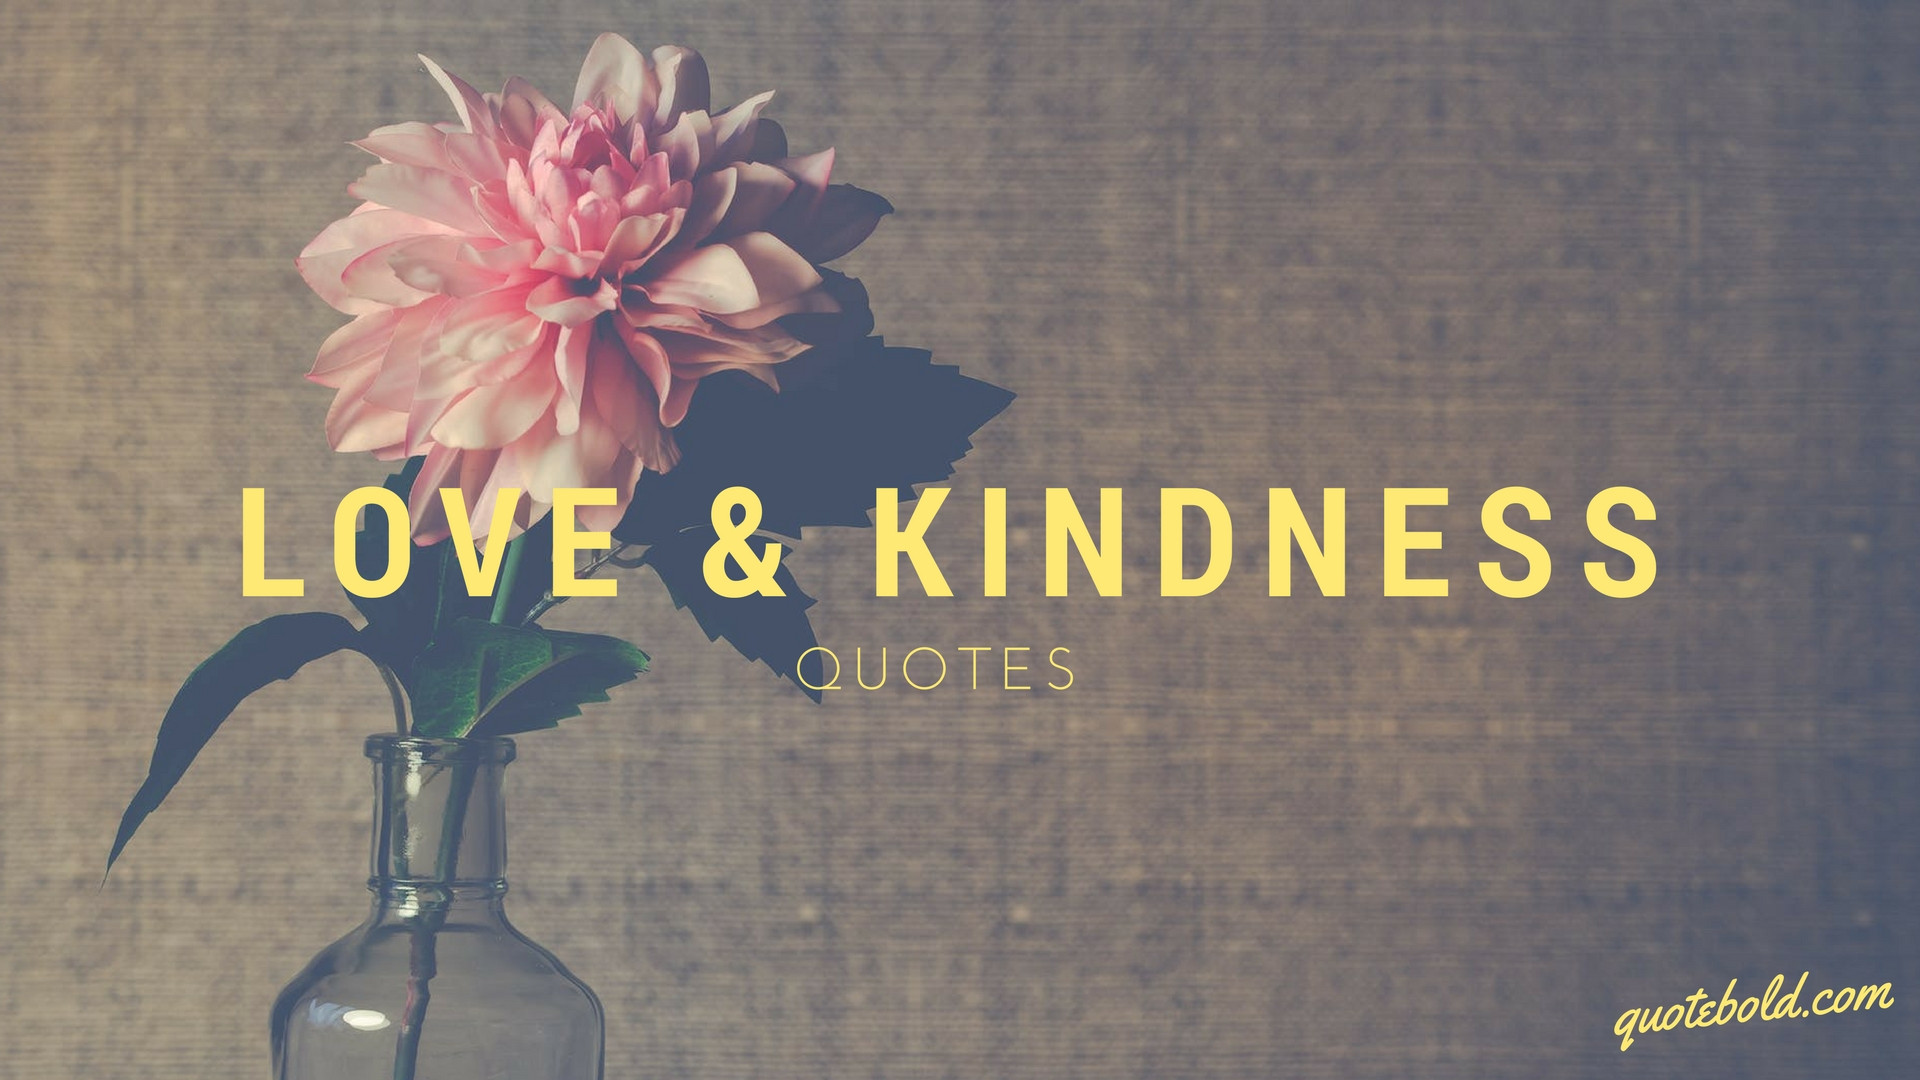 Love And Kindness Quotes
 41 Love & Kindness Quotes with QuoteBold